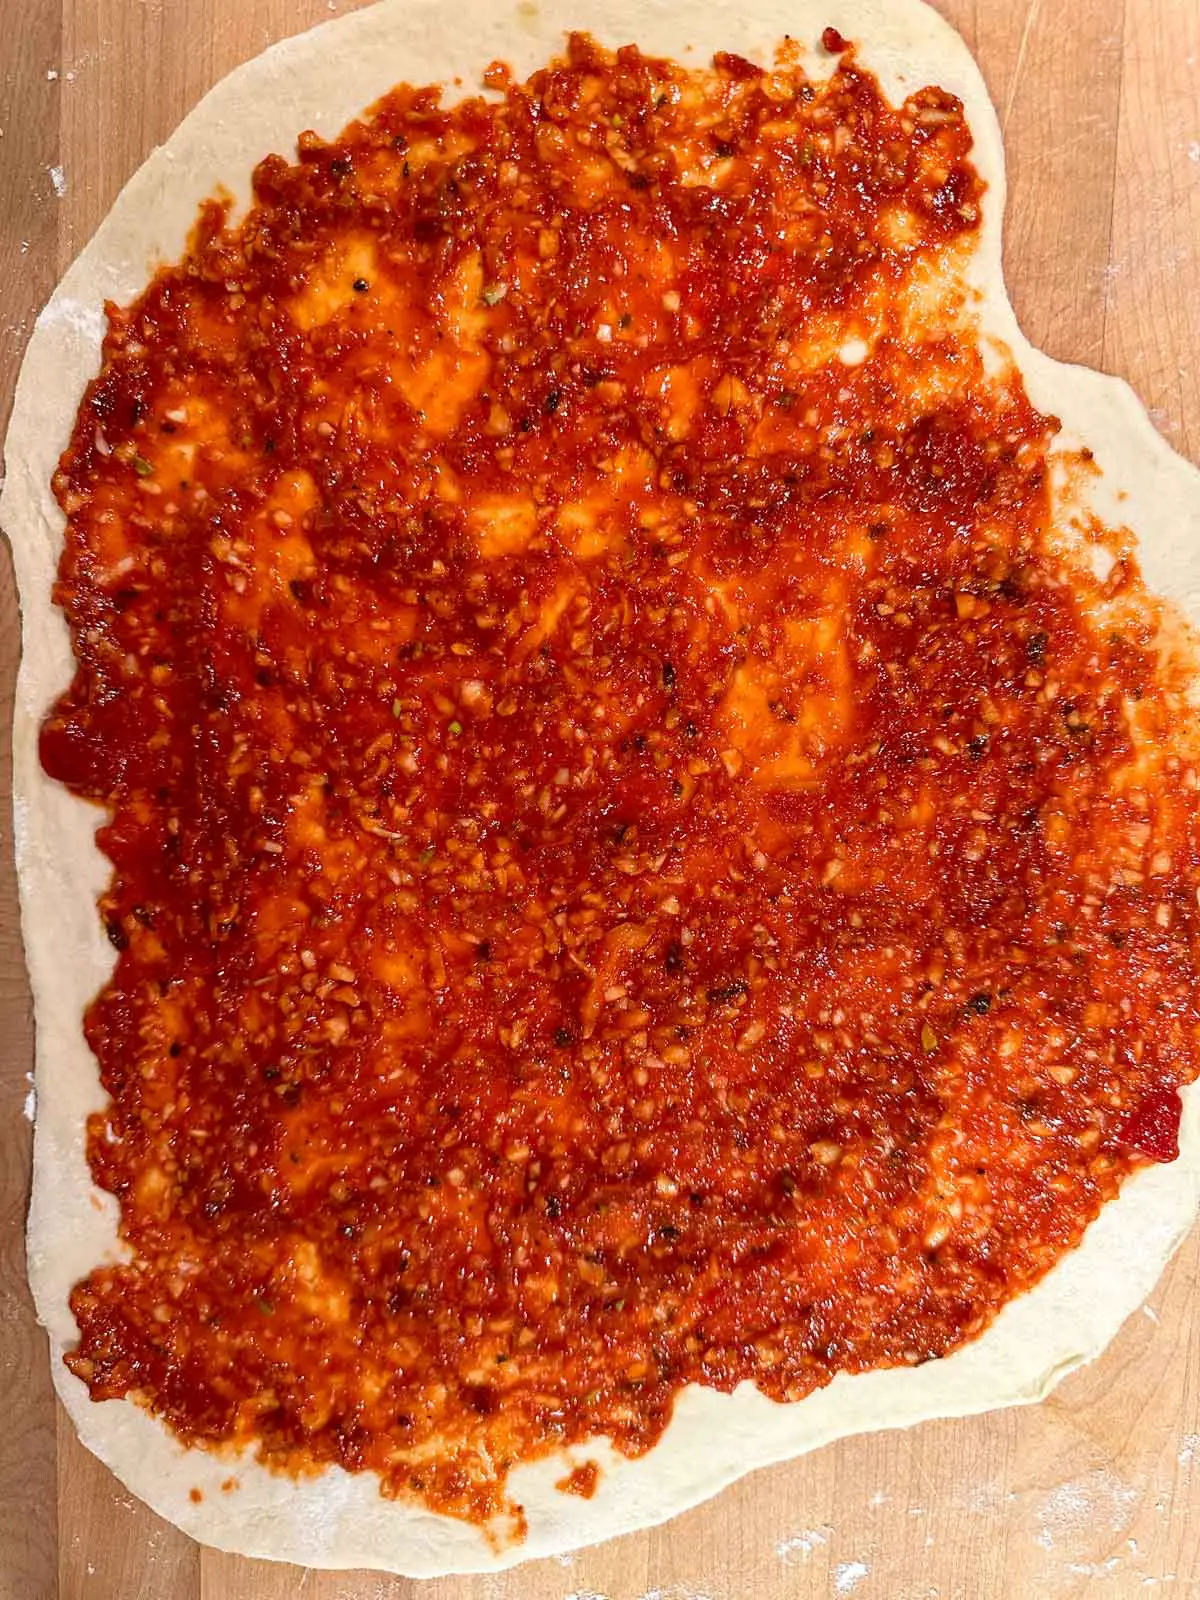 Uncooked pizza base topped with tomato sauce and garlic.